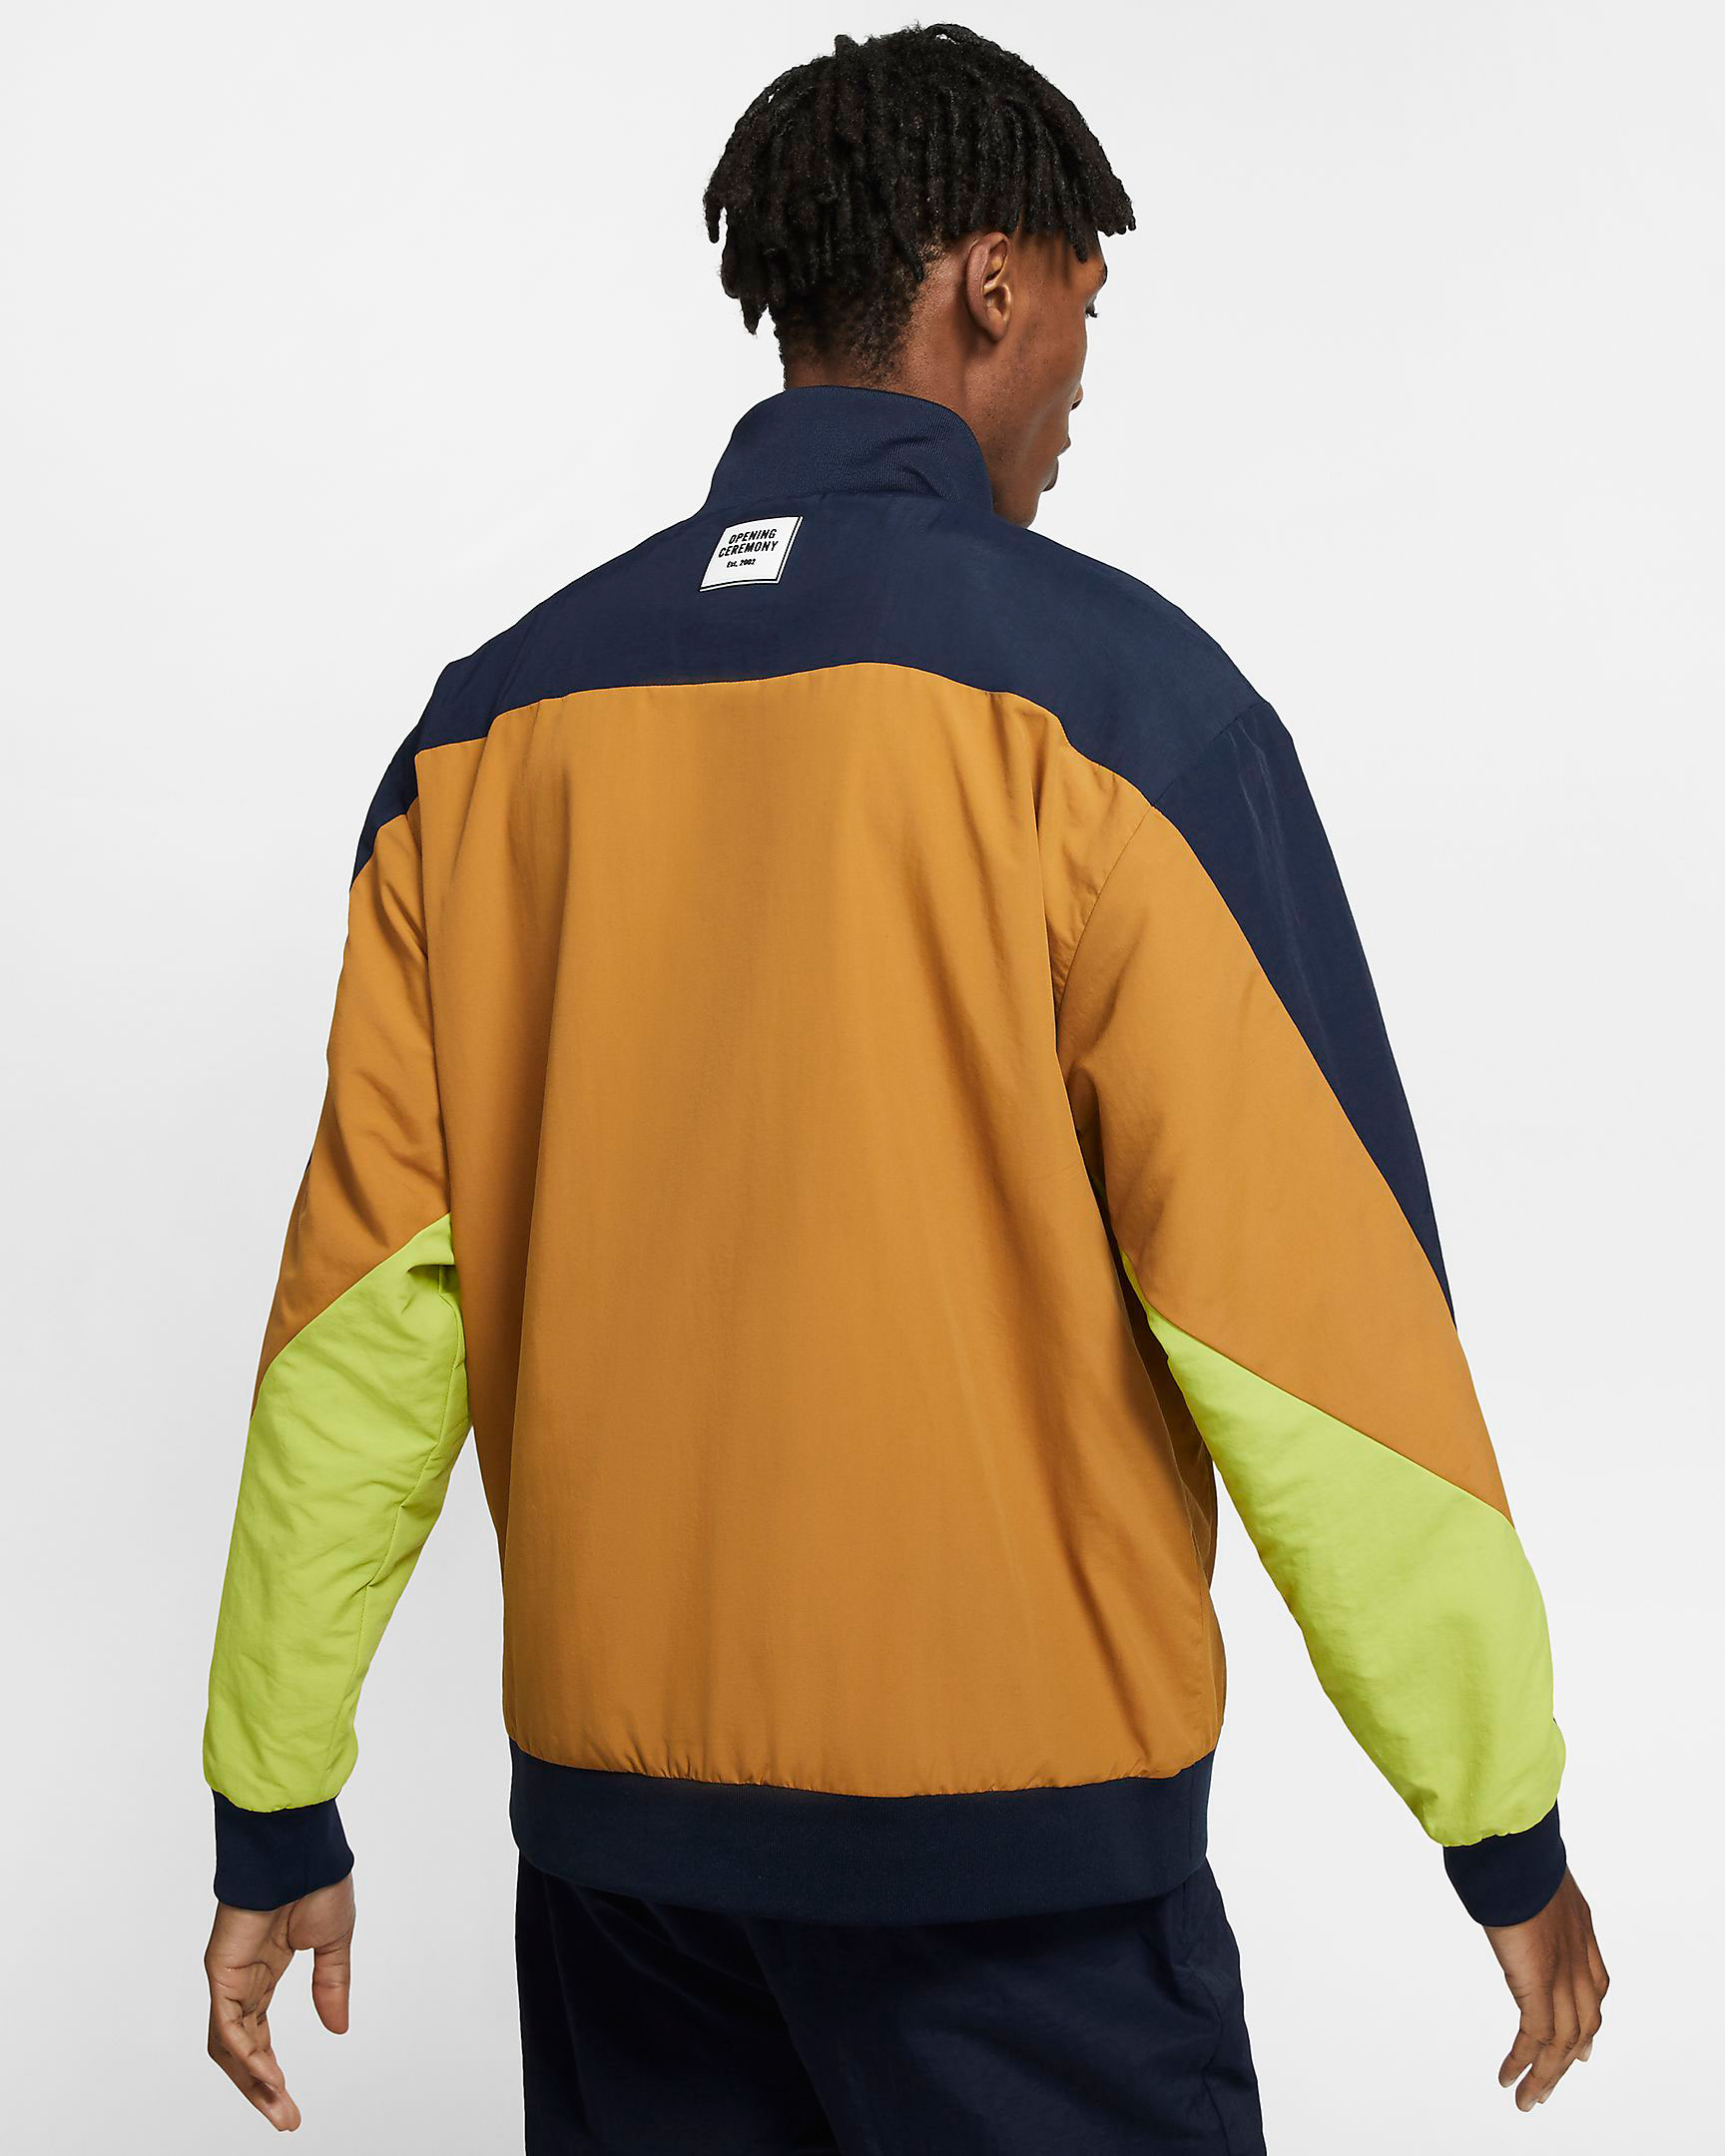 russell-westbrook-opening-ceremony-jacket-2